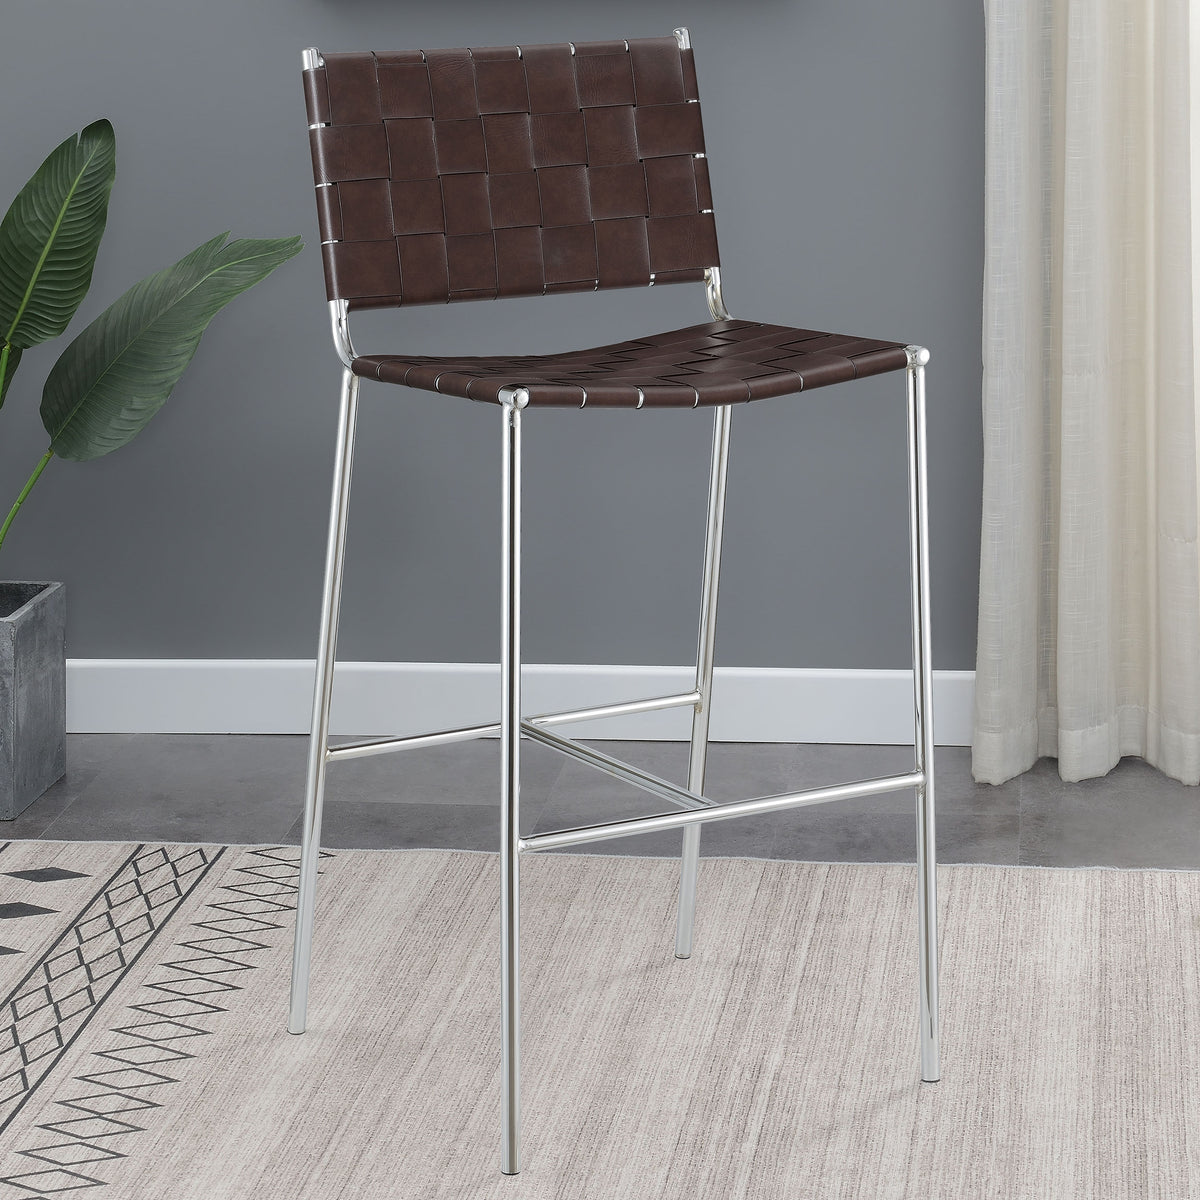 Adelaide Upholstered Bar Stool with Open Back Brown and Chrome Adelaide Upholstered Bar Stool with Open Back Brown and Chrome Half Price Furniture